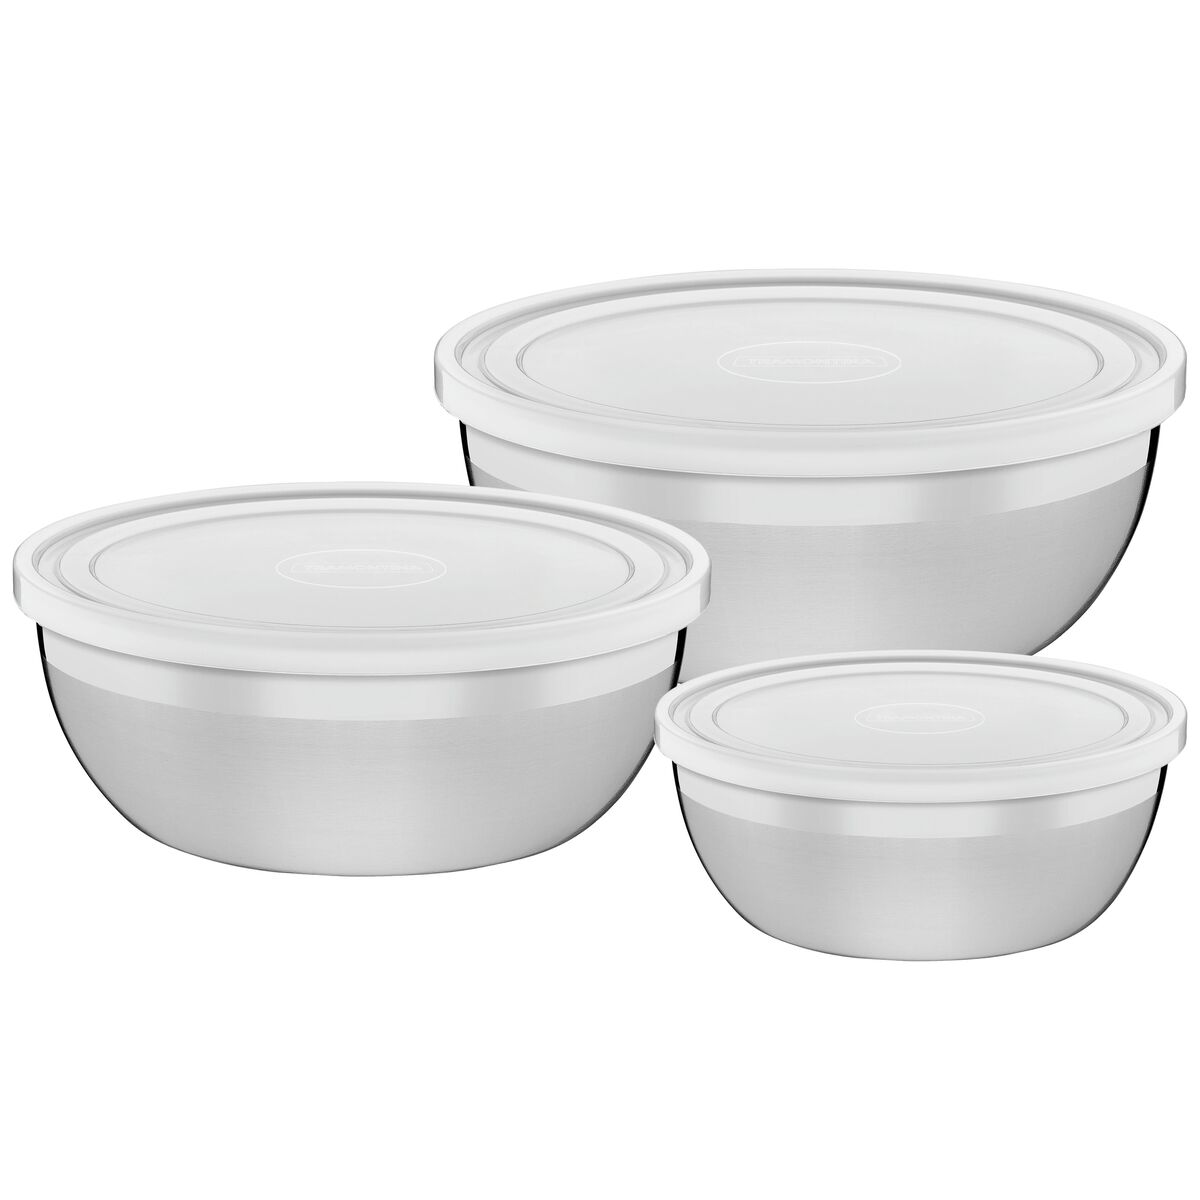 Tramontina Freezinox stainless steel container set with plastic lids, 3 pc set